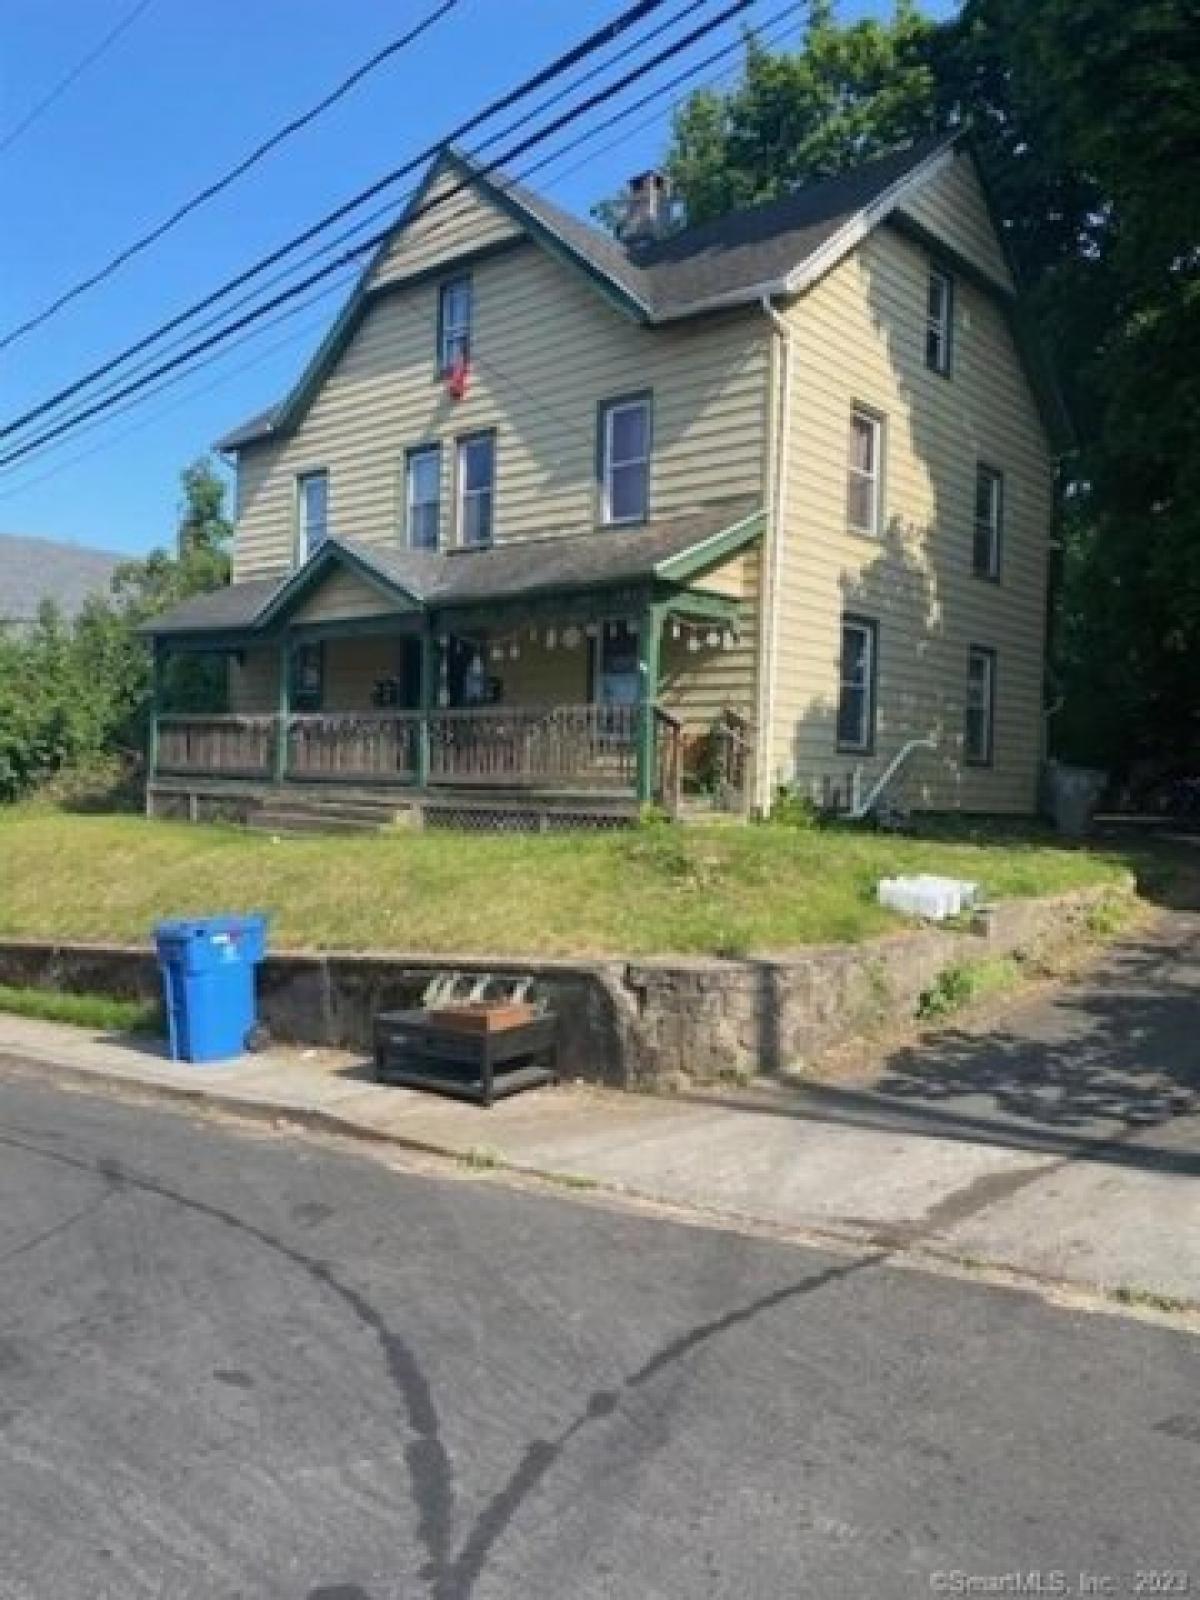 Picture of Home For Sale in Bristol, Connecticut, United States